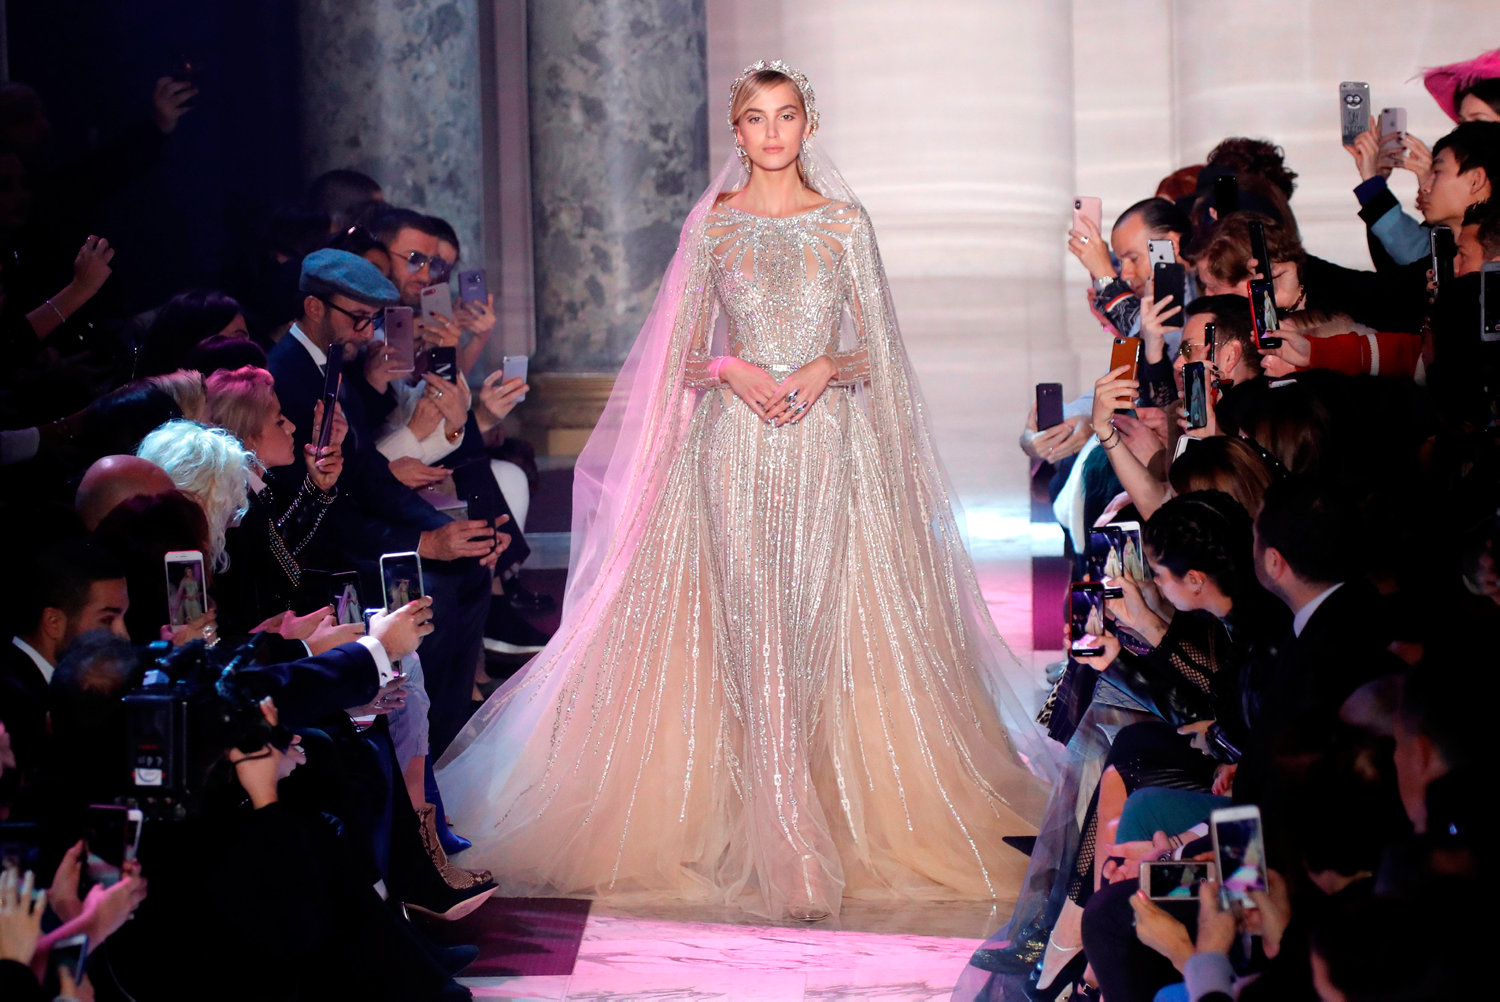 A model presents a wedding dress by designer Elie Saab as part of his Haute Couture Spring-Summer 2018 fashion show in Paris